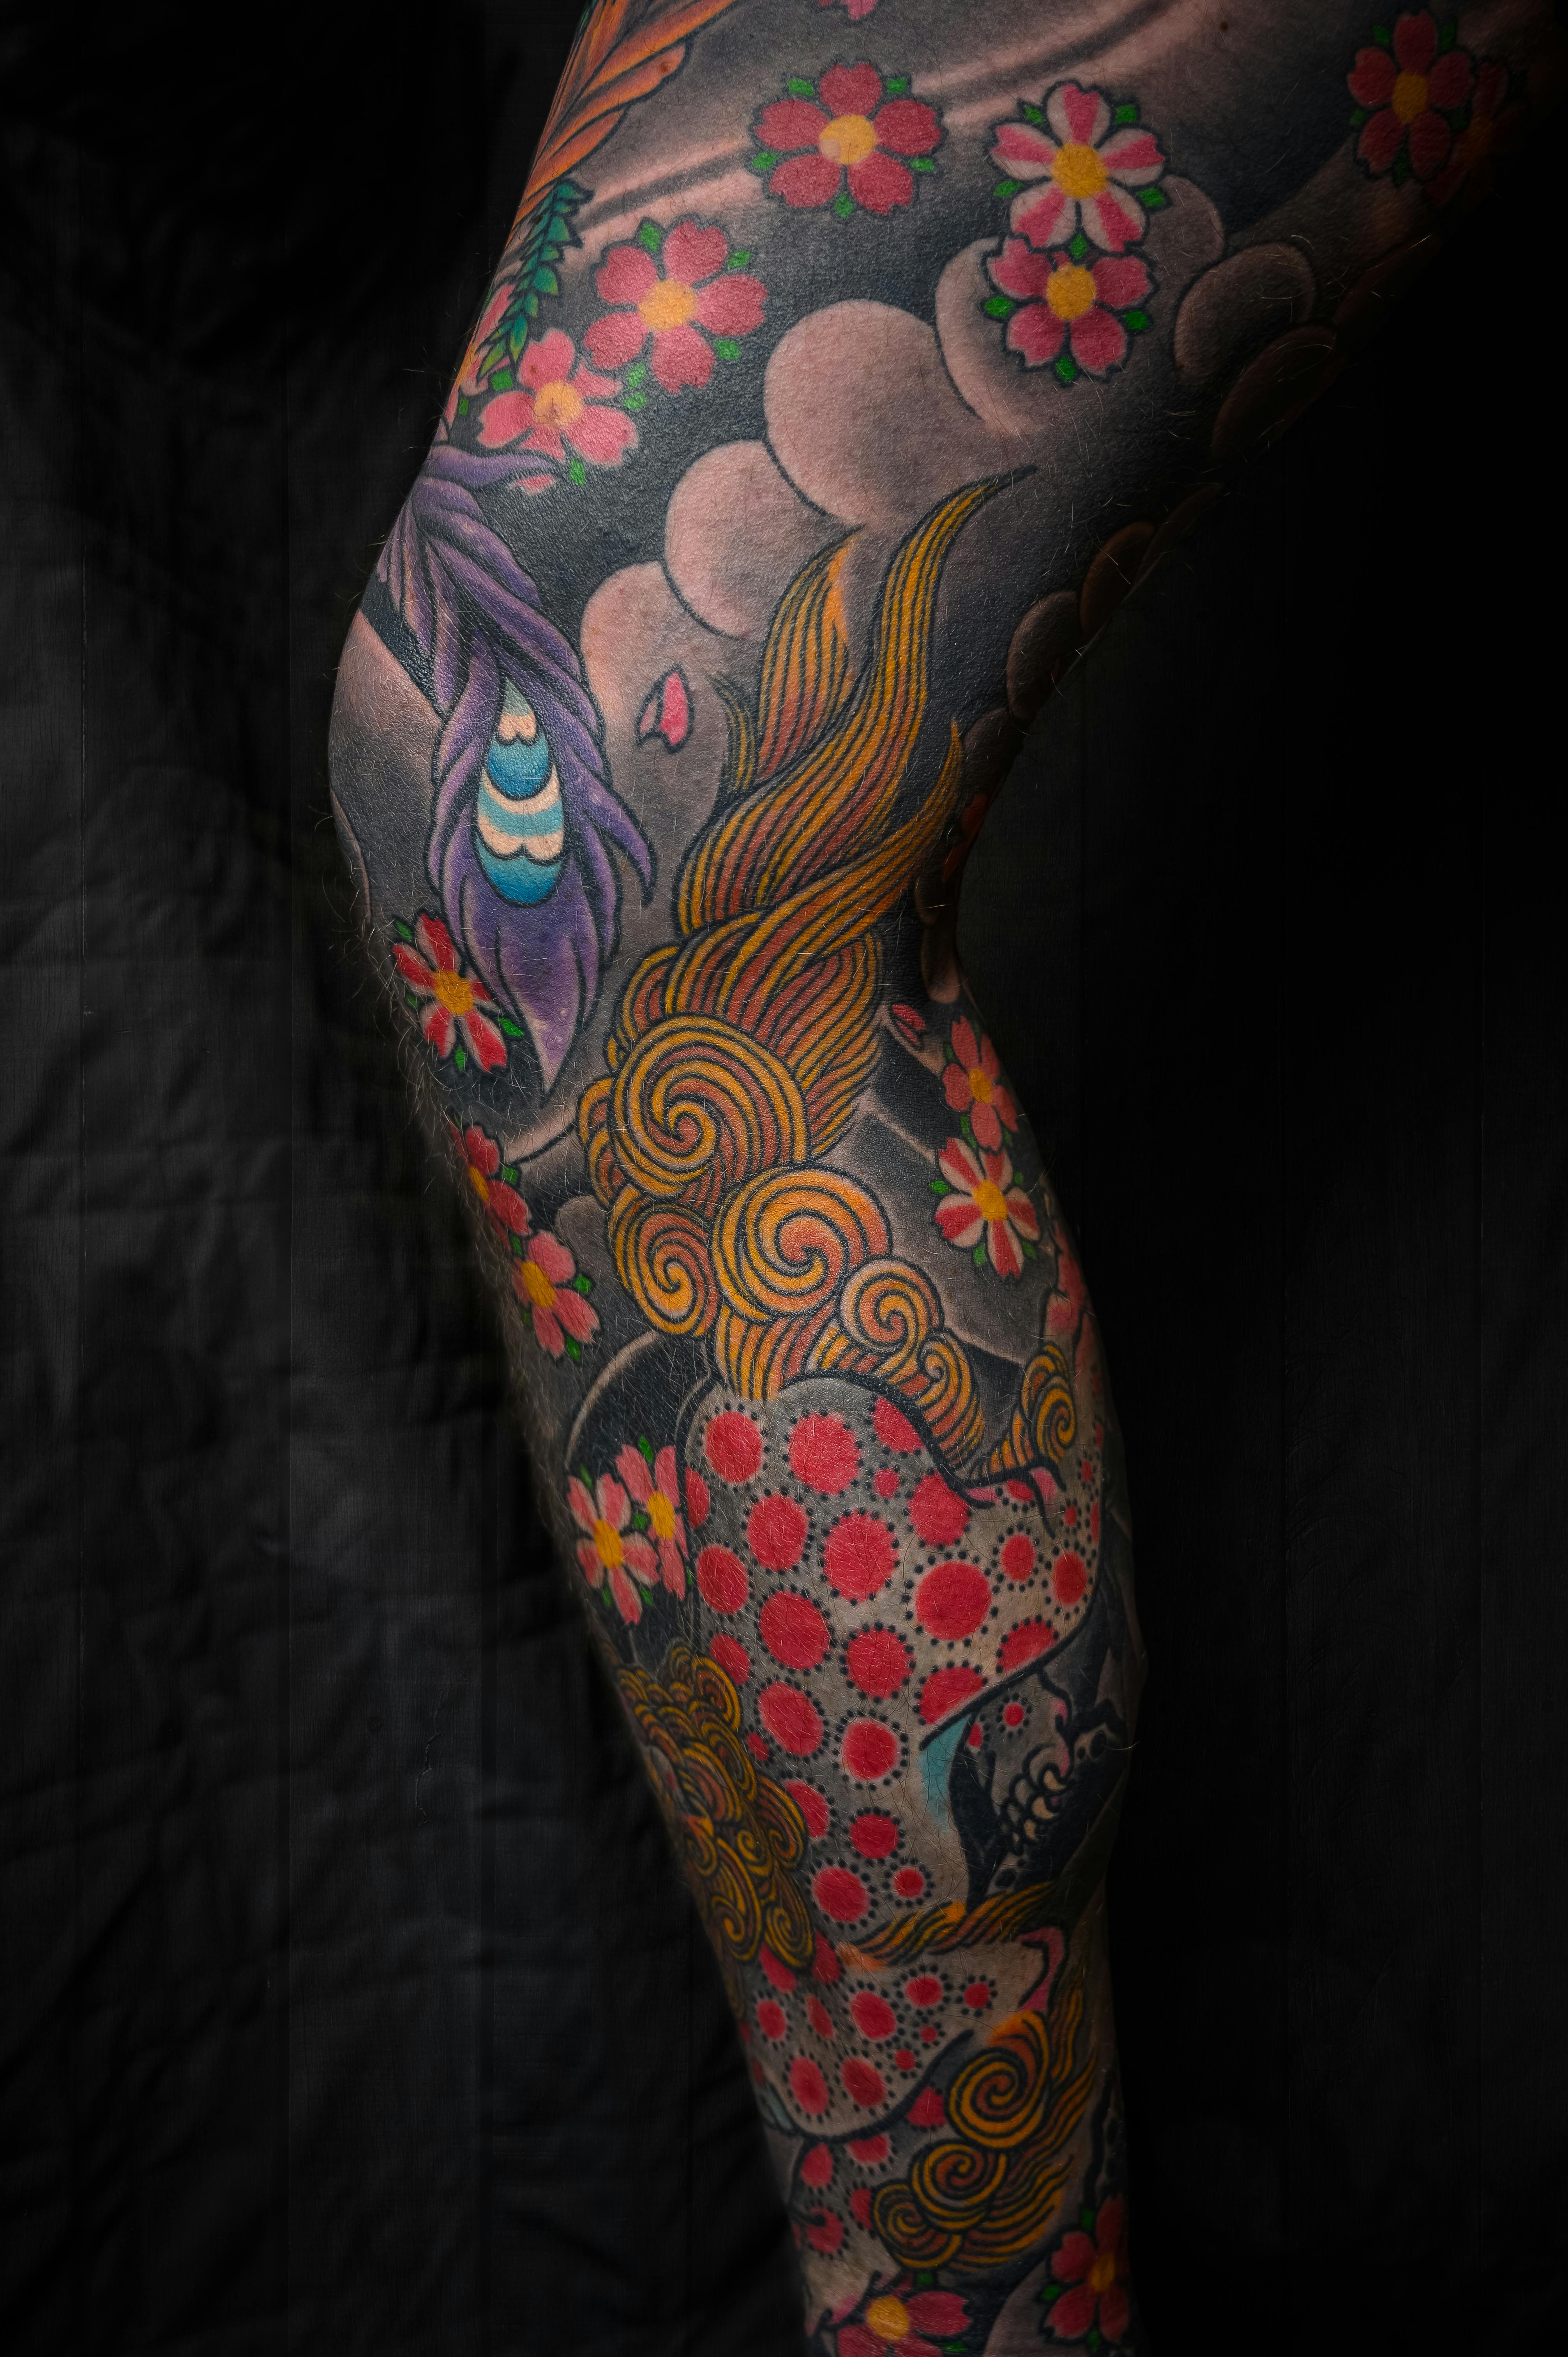 Tattoo uploaded by Stacie Mayer  Stunning color realism floral thight  piece Tattoo by Maija Arminen realism colorrealism MaijaArminen floral  flower  Tattoodo